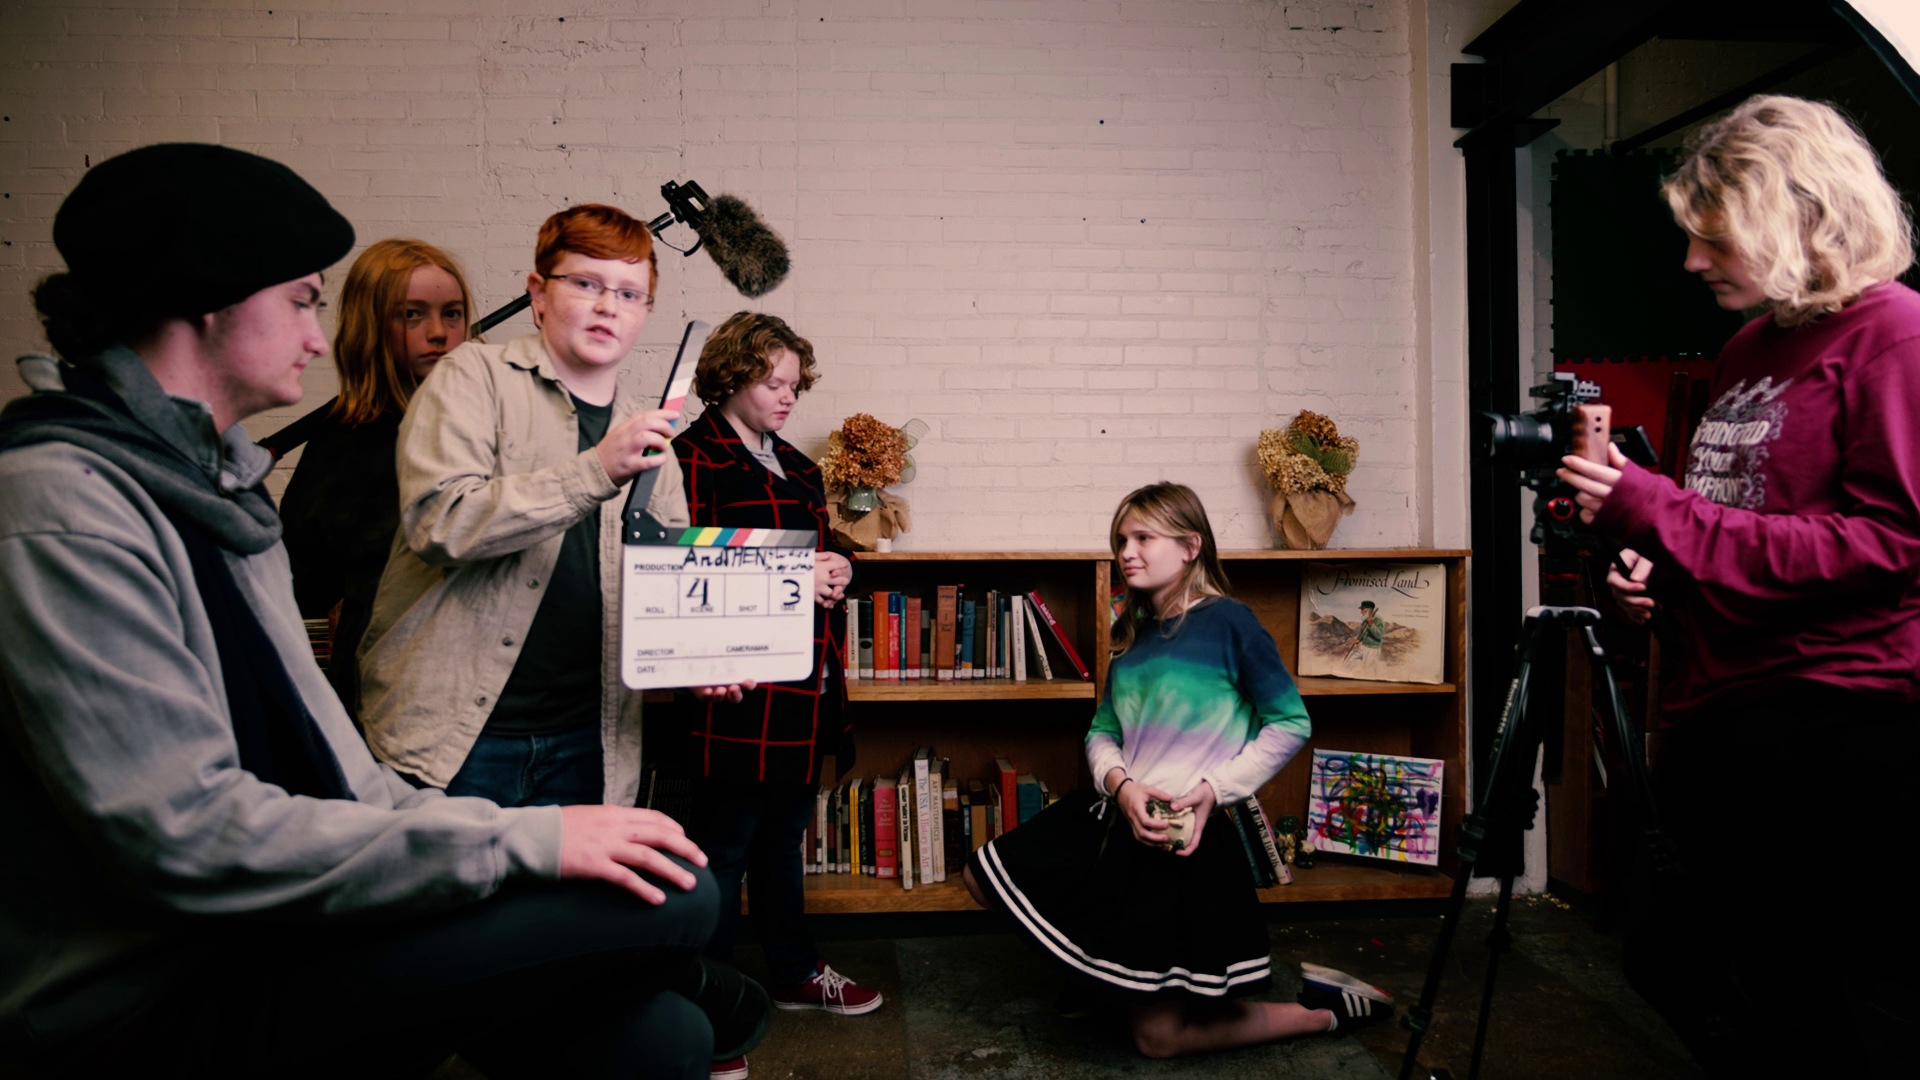 A group of children prepares to record a scene from a movie